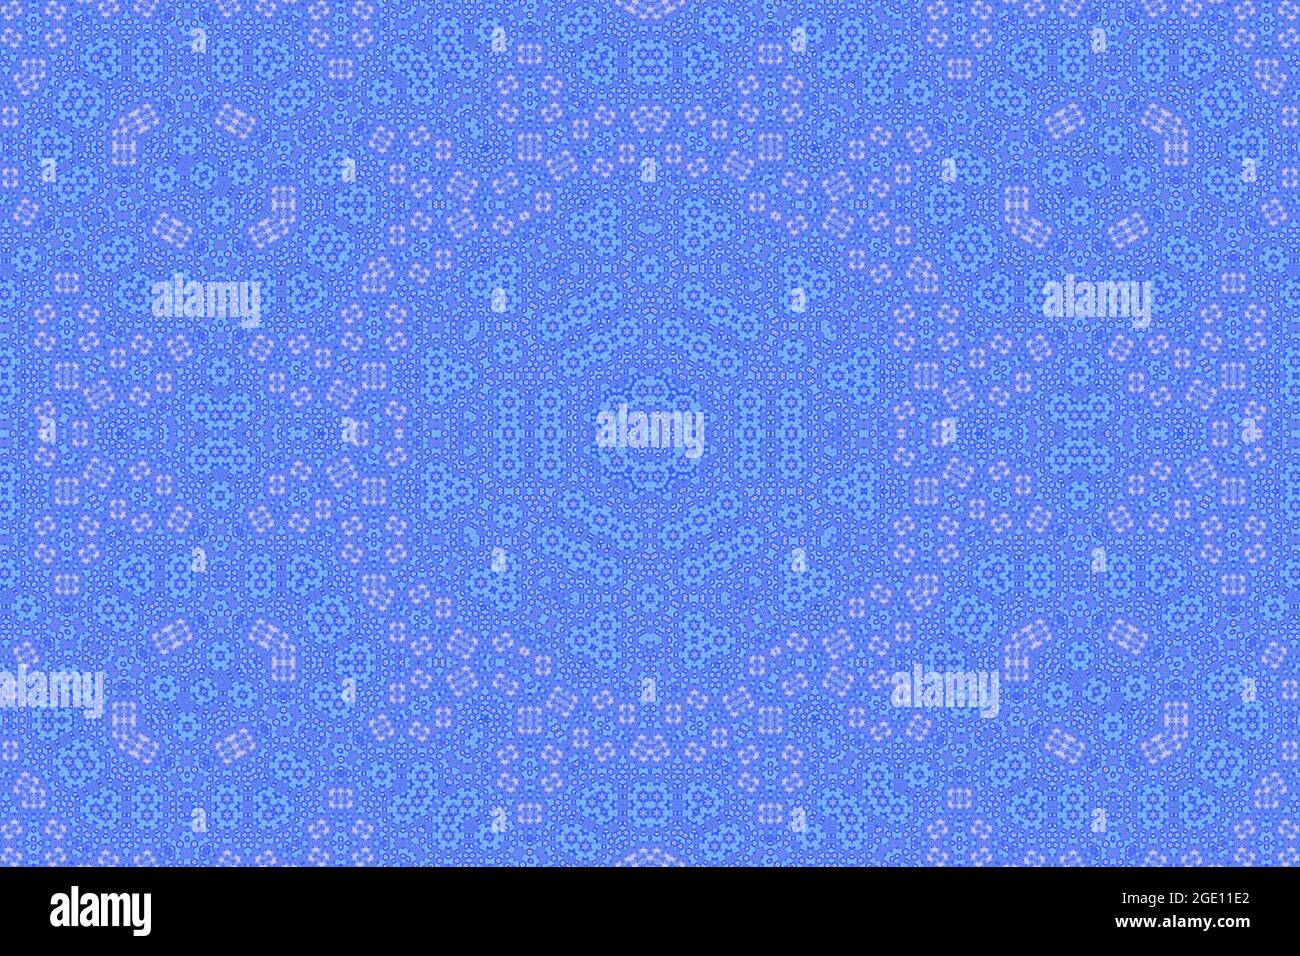 Midnight sky abstract digital pattern. Aztec kaleidoscope pattern. Space age digital pattern. Stars in the sky abstract. Blue energy hexagon pattern. Stock Photo